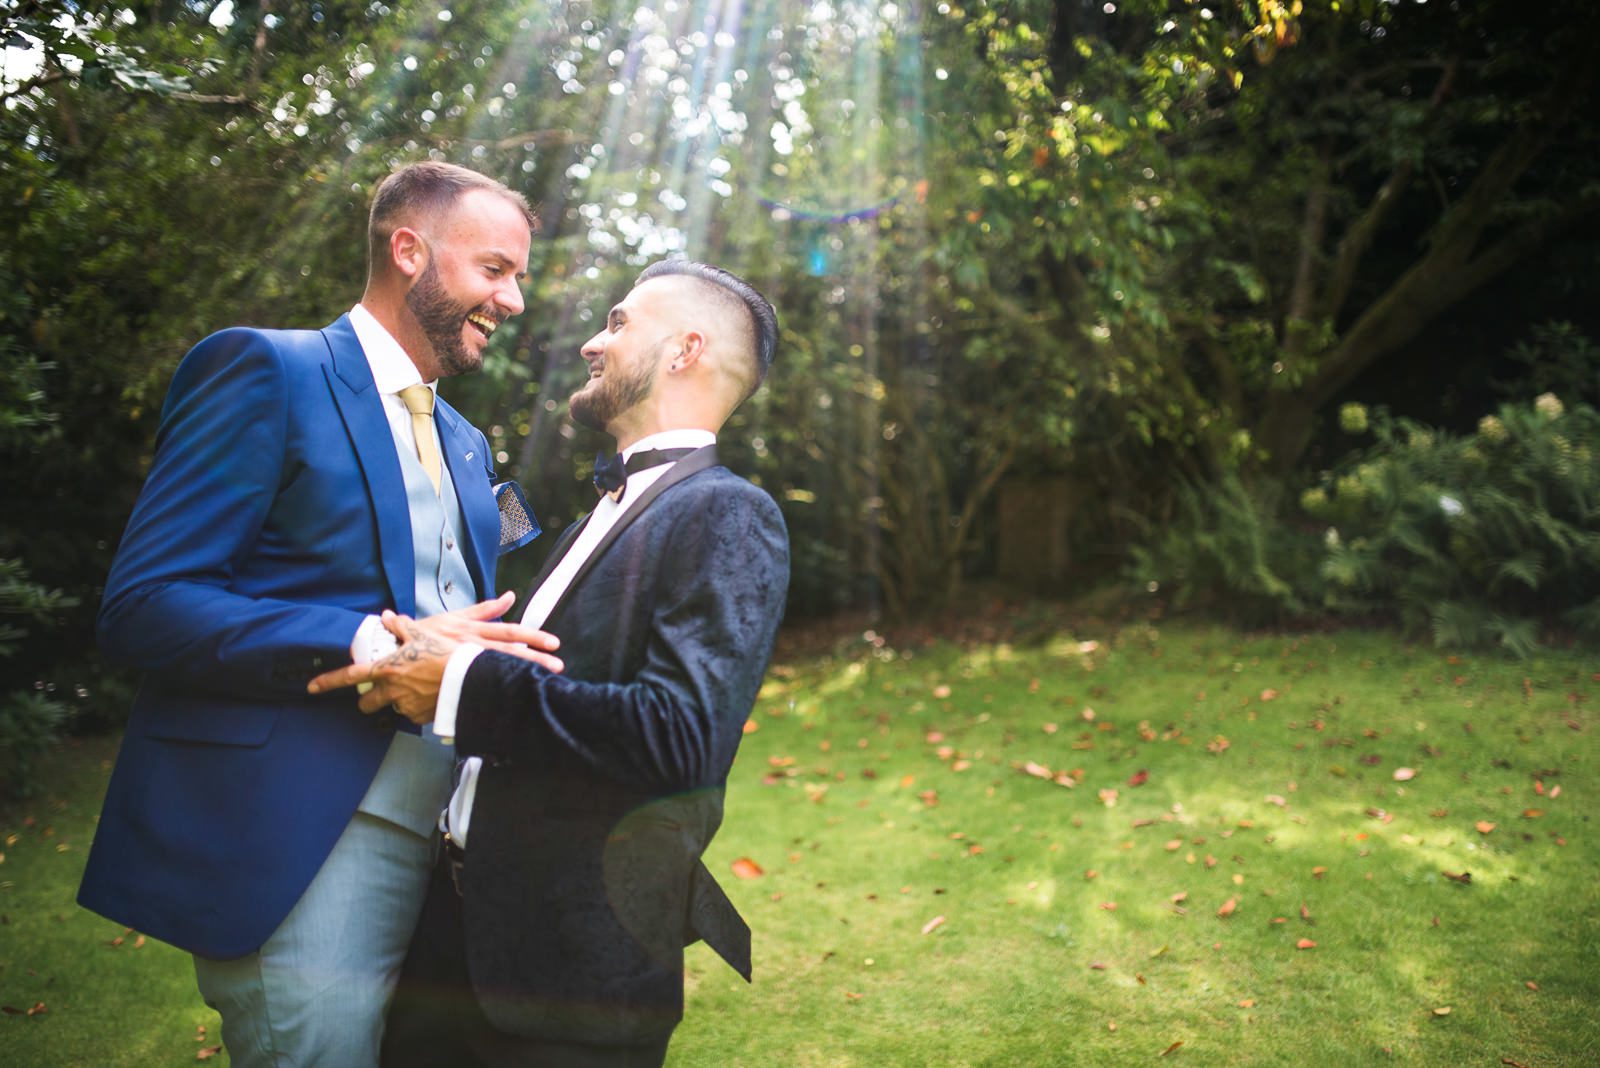 Stylish wedding photography for a same sex Summer wedding featuring the grooms laughing and cuddling together.